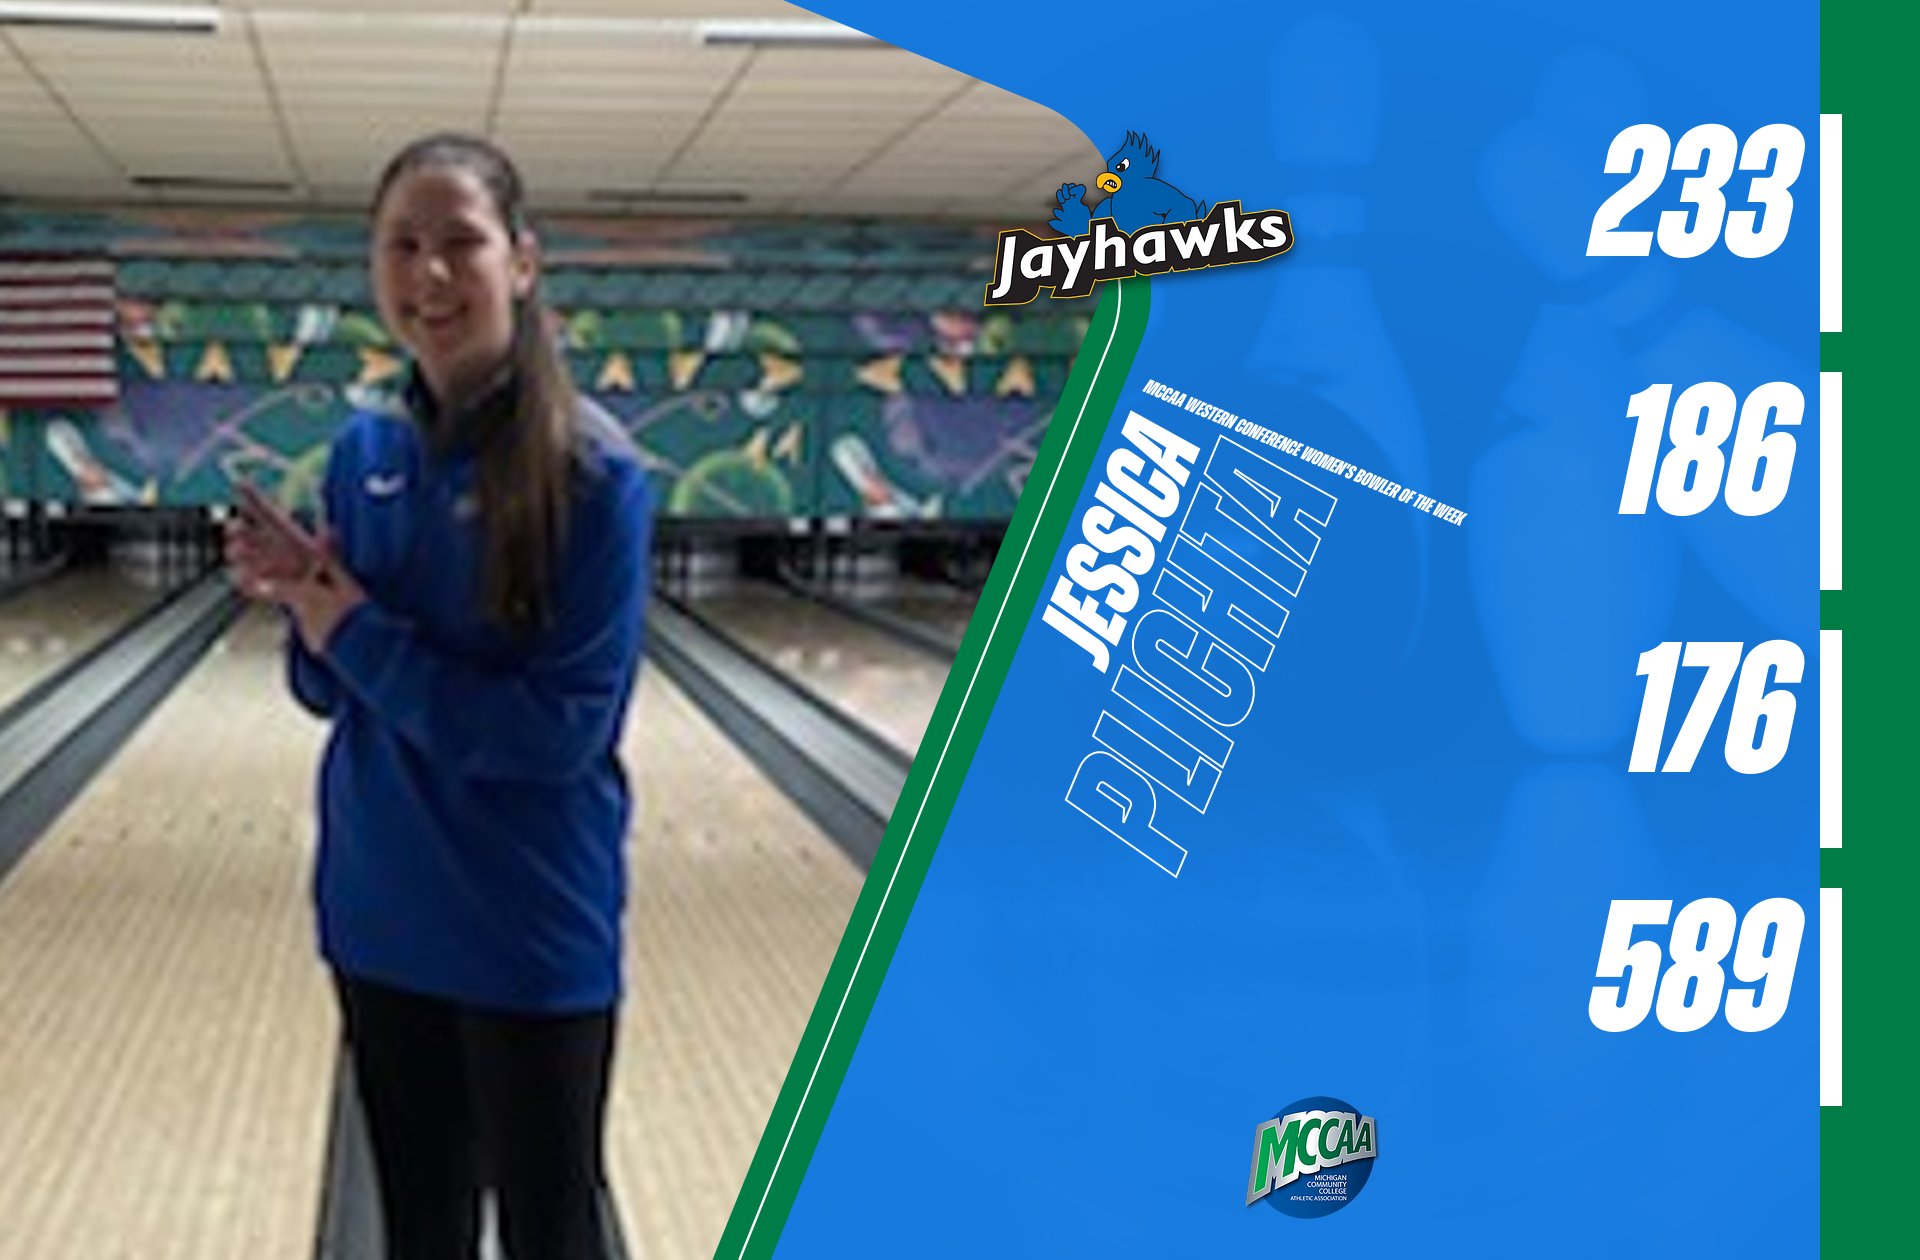 Jessica Plichta, MCCAA Western Conference, Women's Bowler of the Week, Jackson College